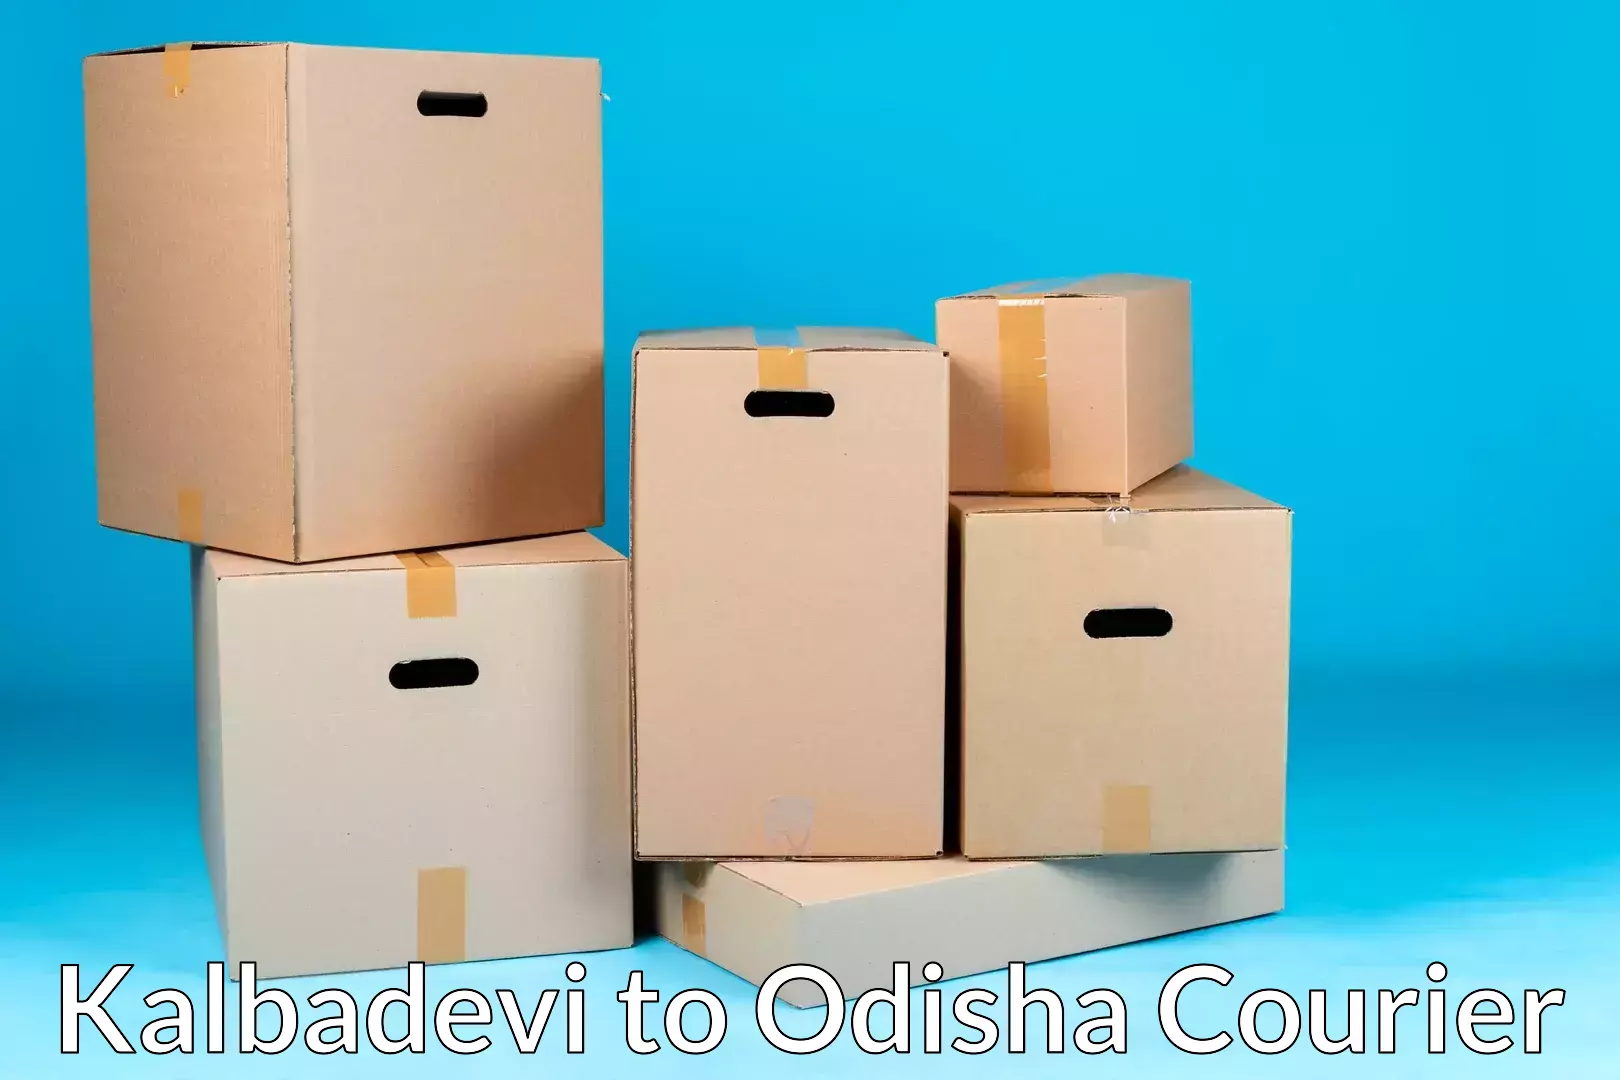 Moving and packing experts in Kalbadevi to Raj Berhampur